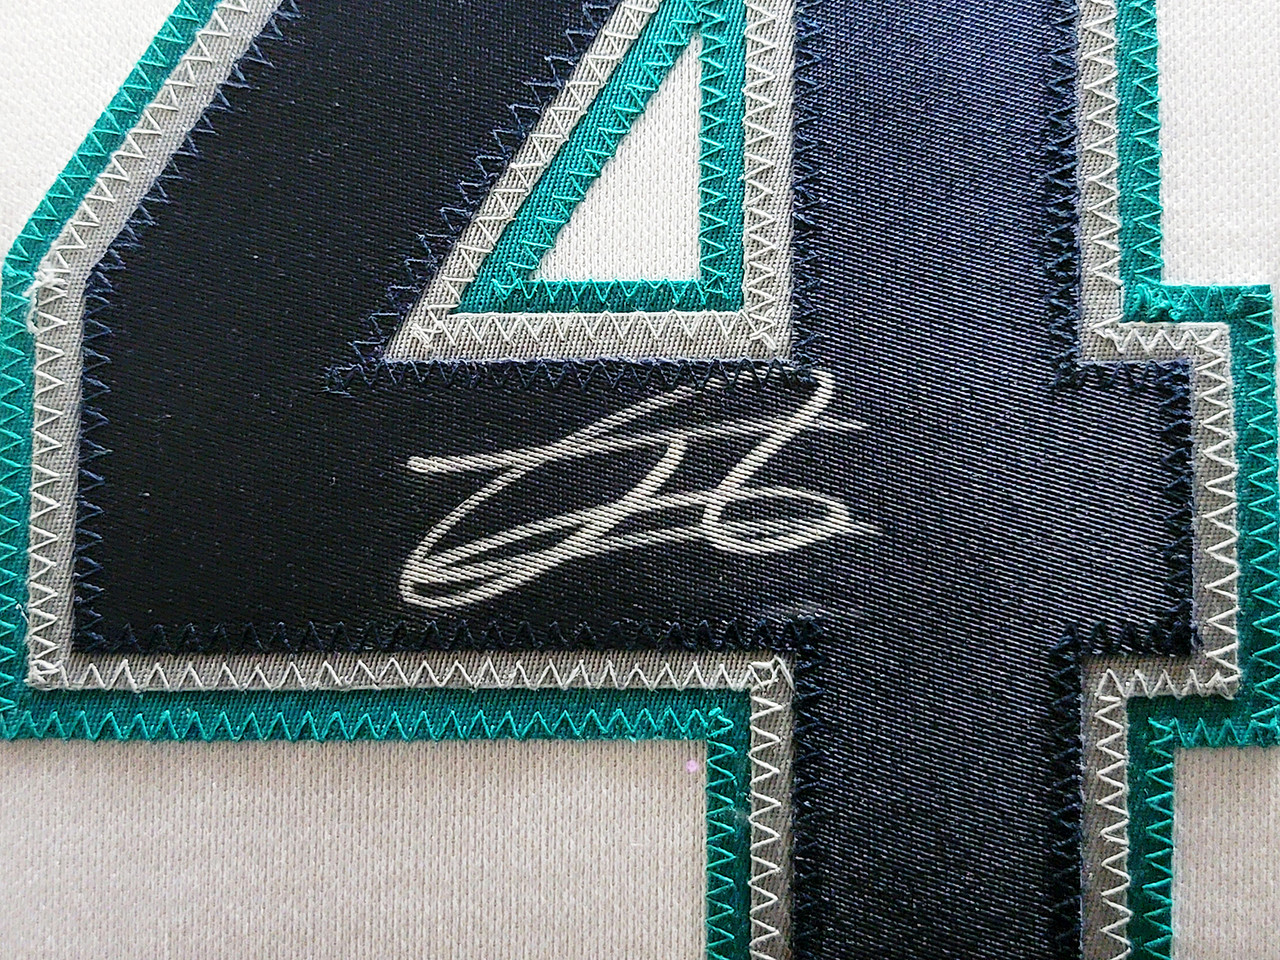 Seattle Mariners Julio Rodriguez Autographed Framed White Jersey JROD Show  Beckett BAS Witness Stock #210990 - Mill Creek Sports